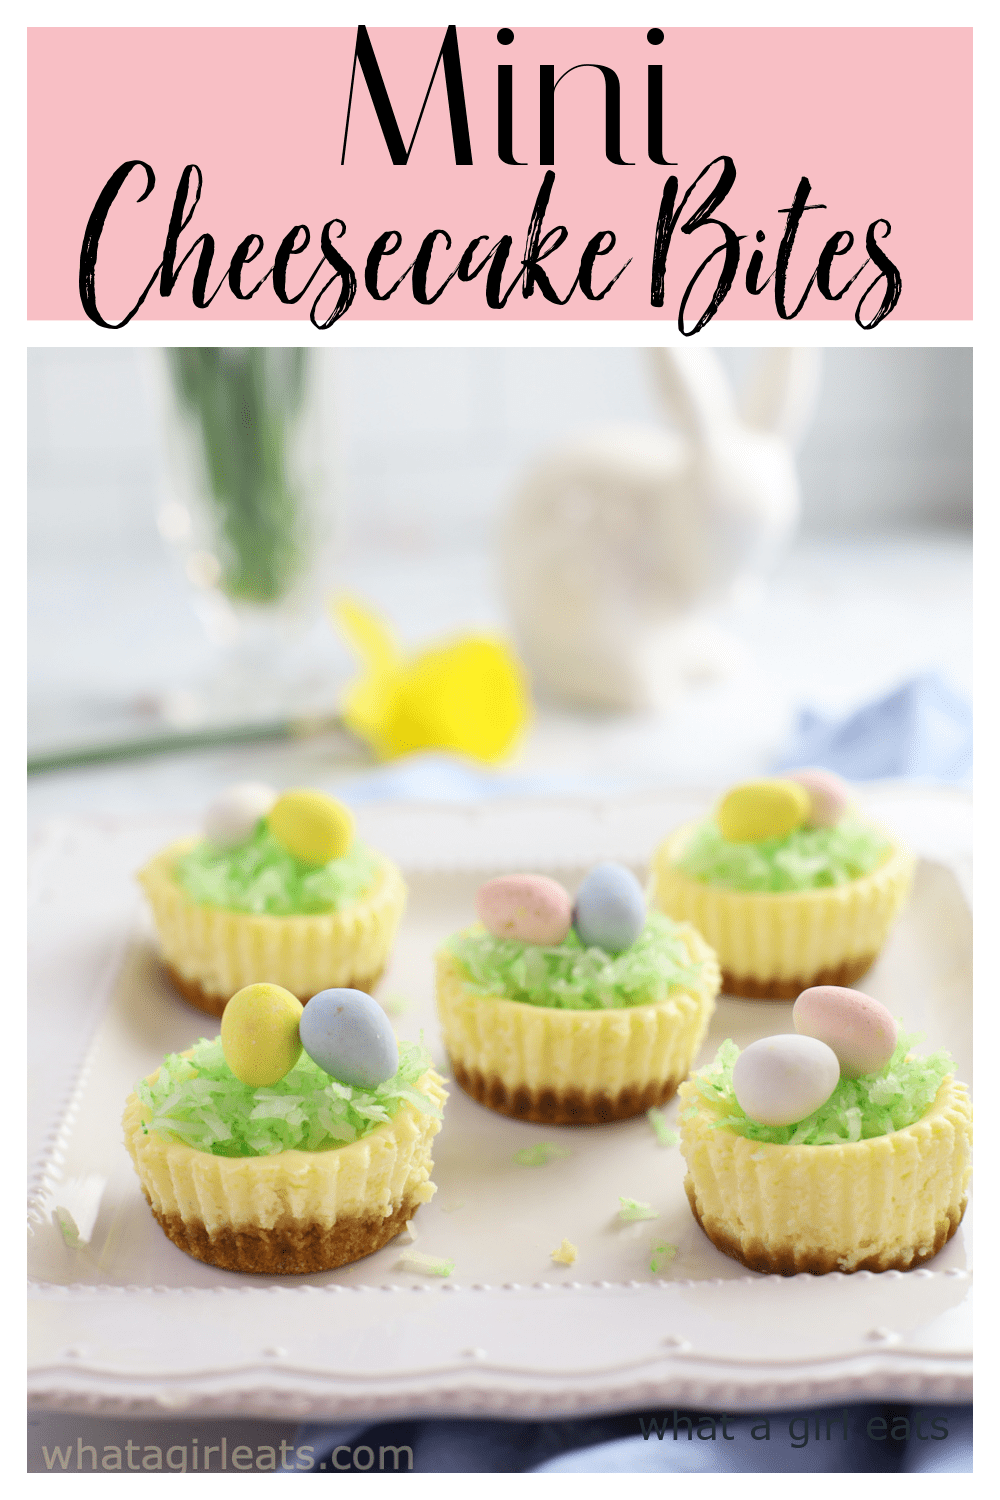 Cheesecake bites are the perfect dessert for a party. They're a breeze to make, can be customized with different toppings or fresh fruit.